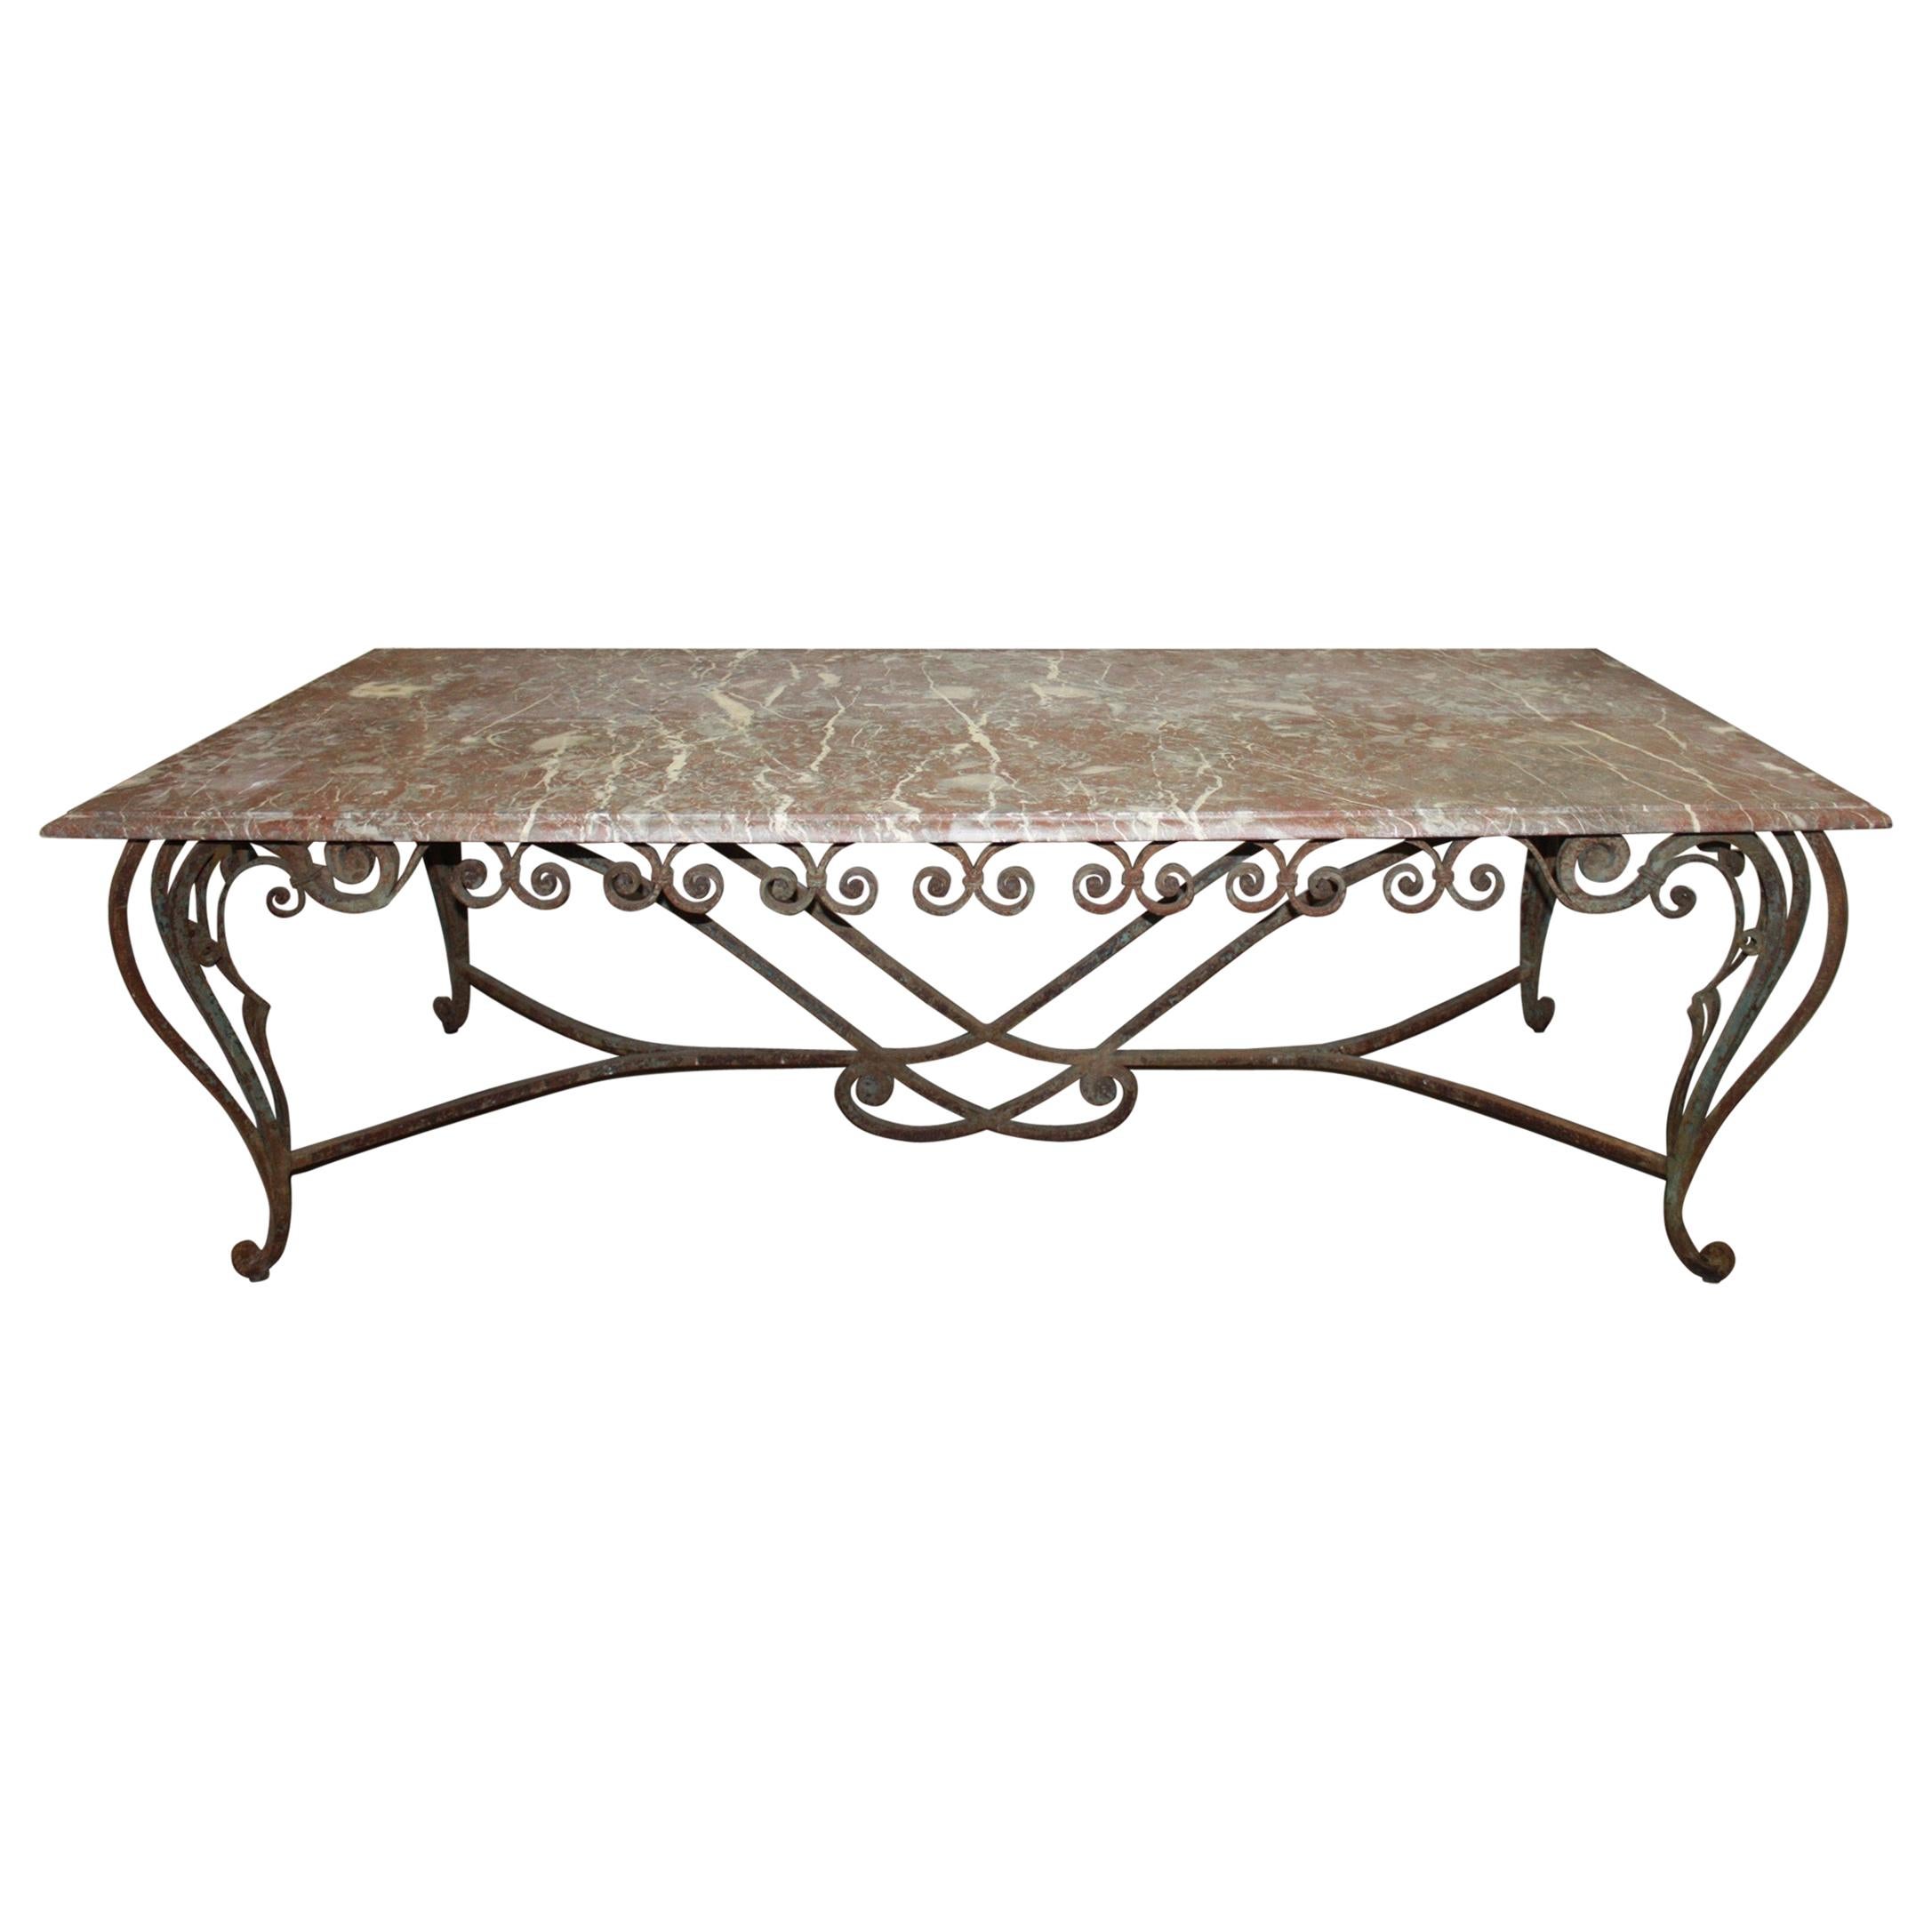 Magnificent 19th Century French Iron Table